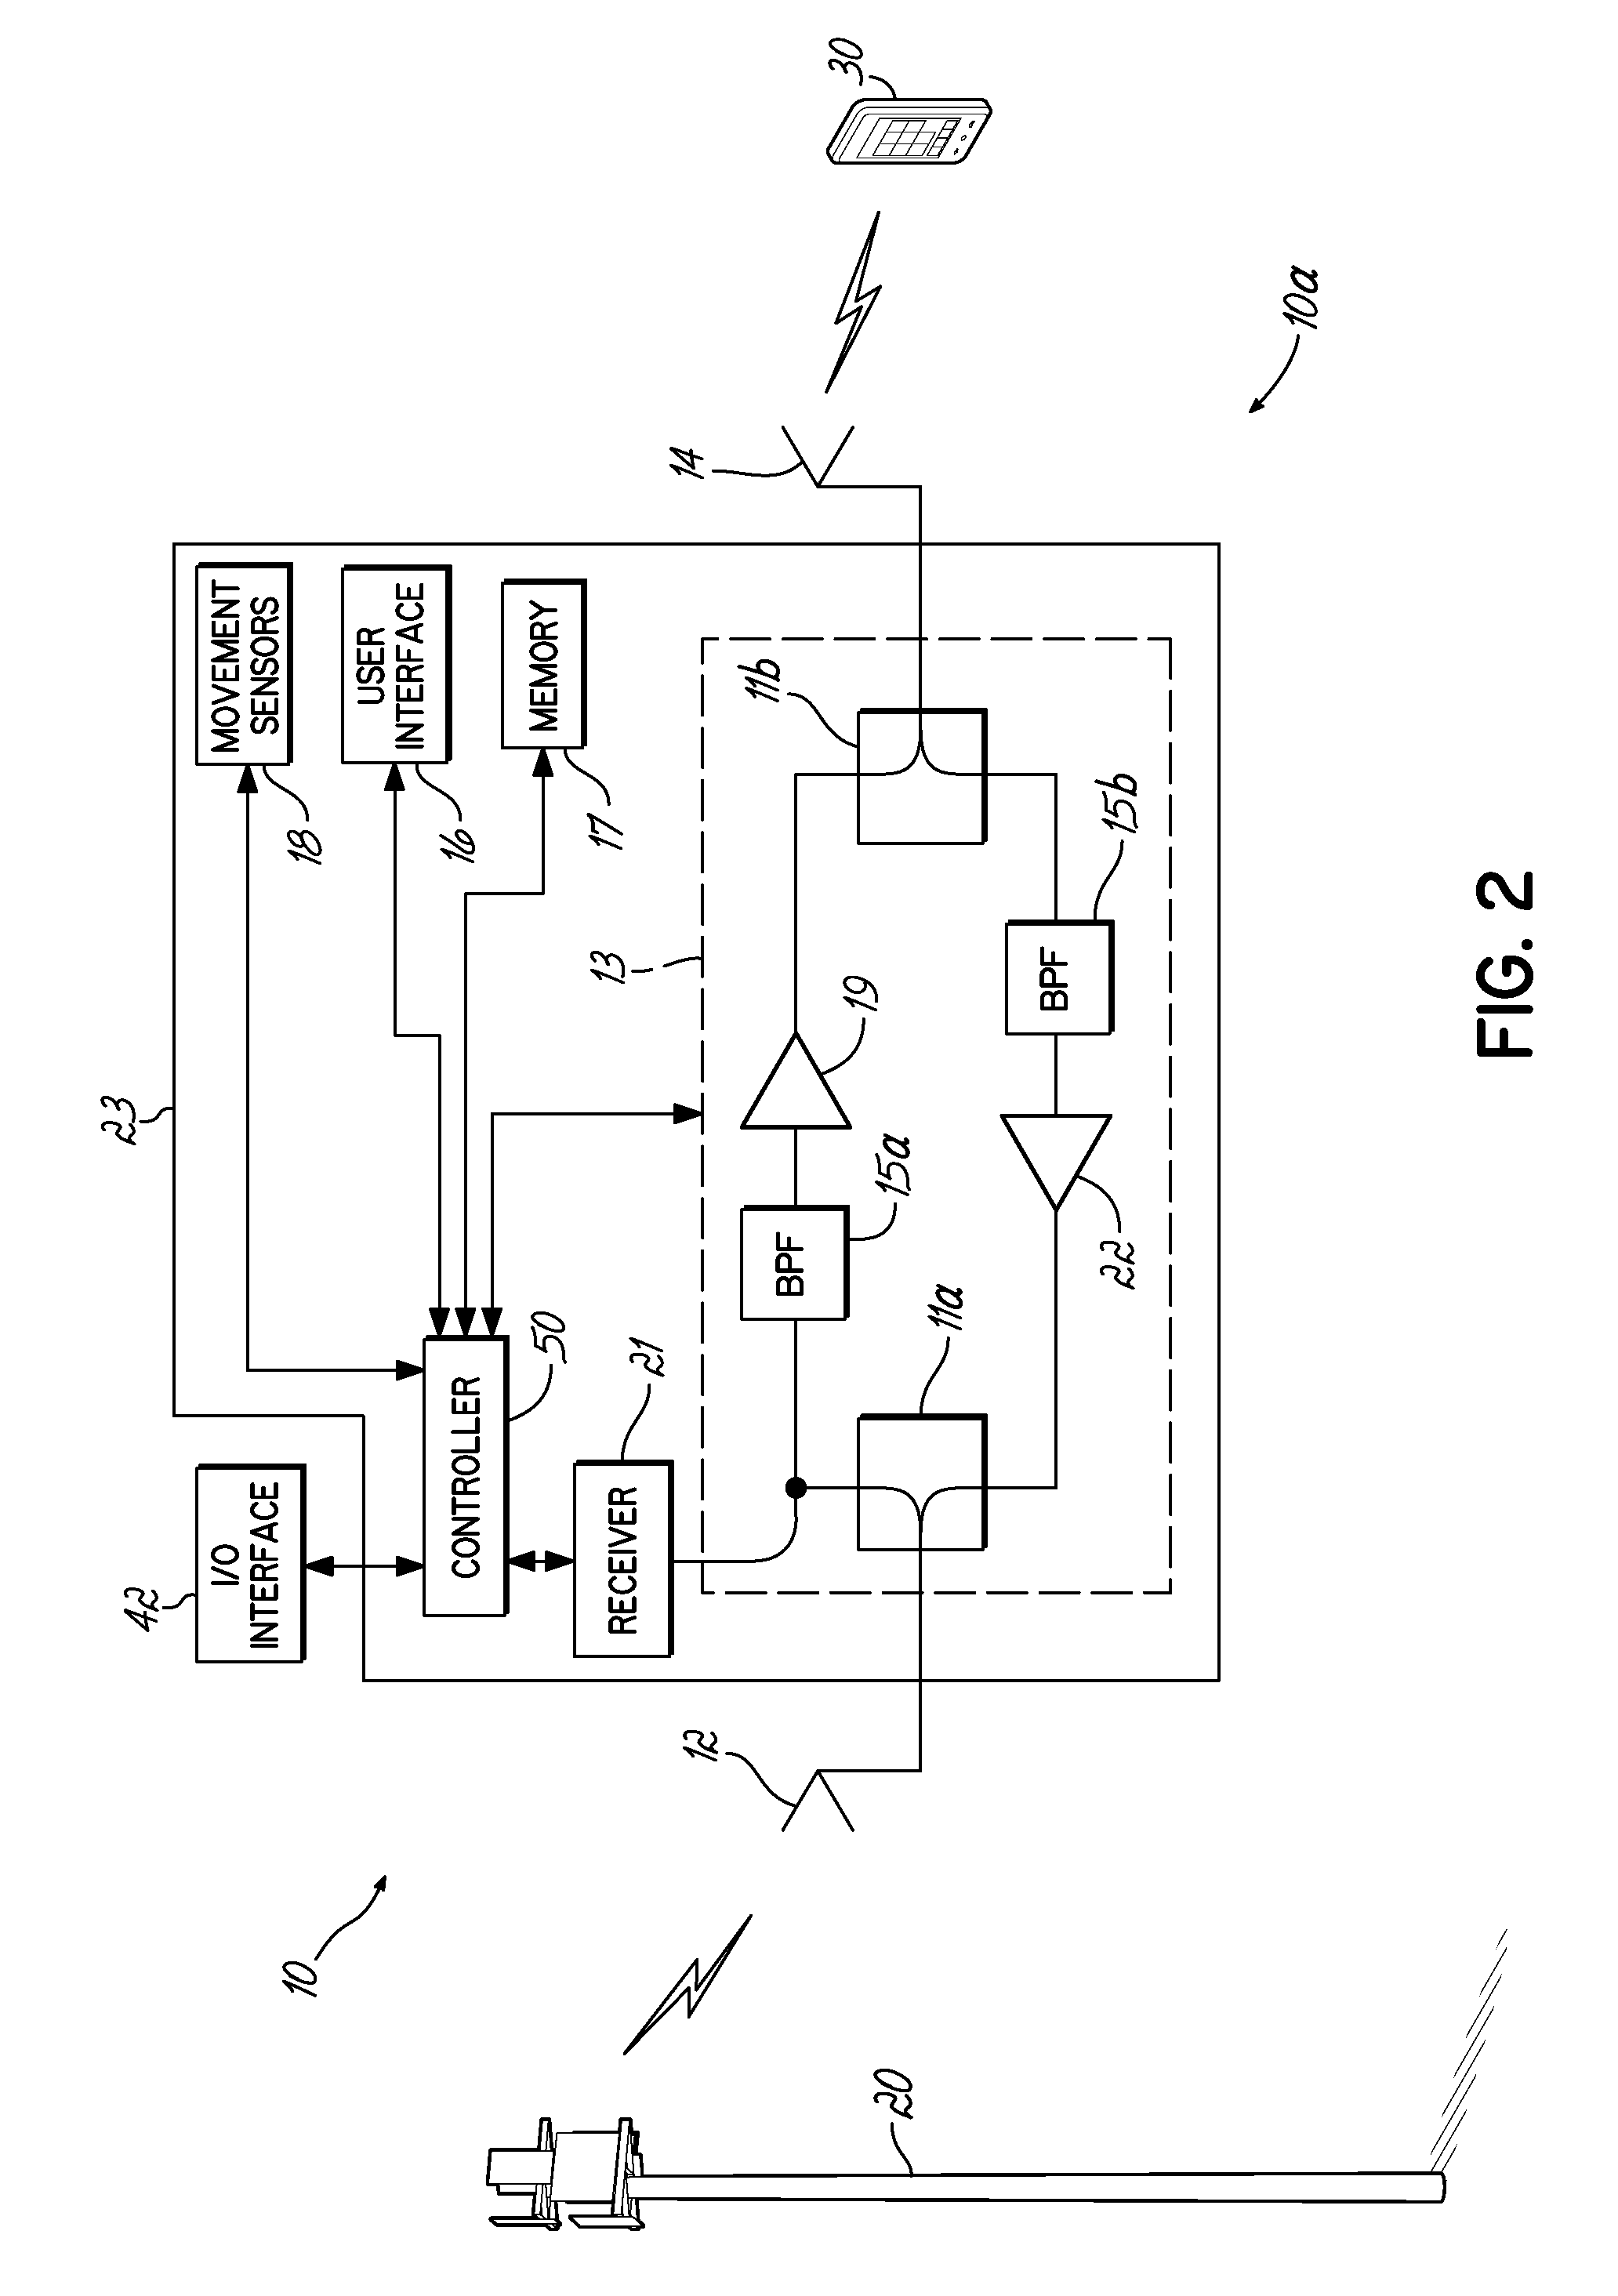 Mobile repeater system and method having geophysical location awareness without use of GPS